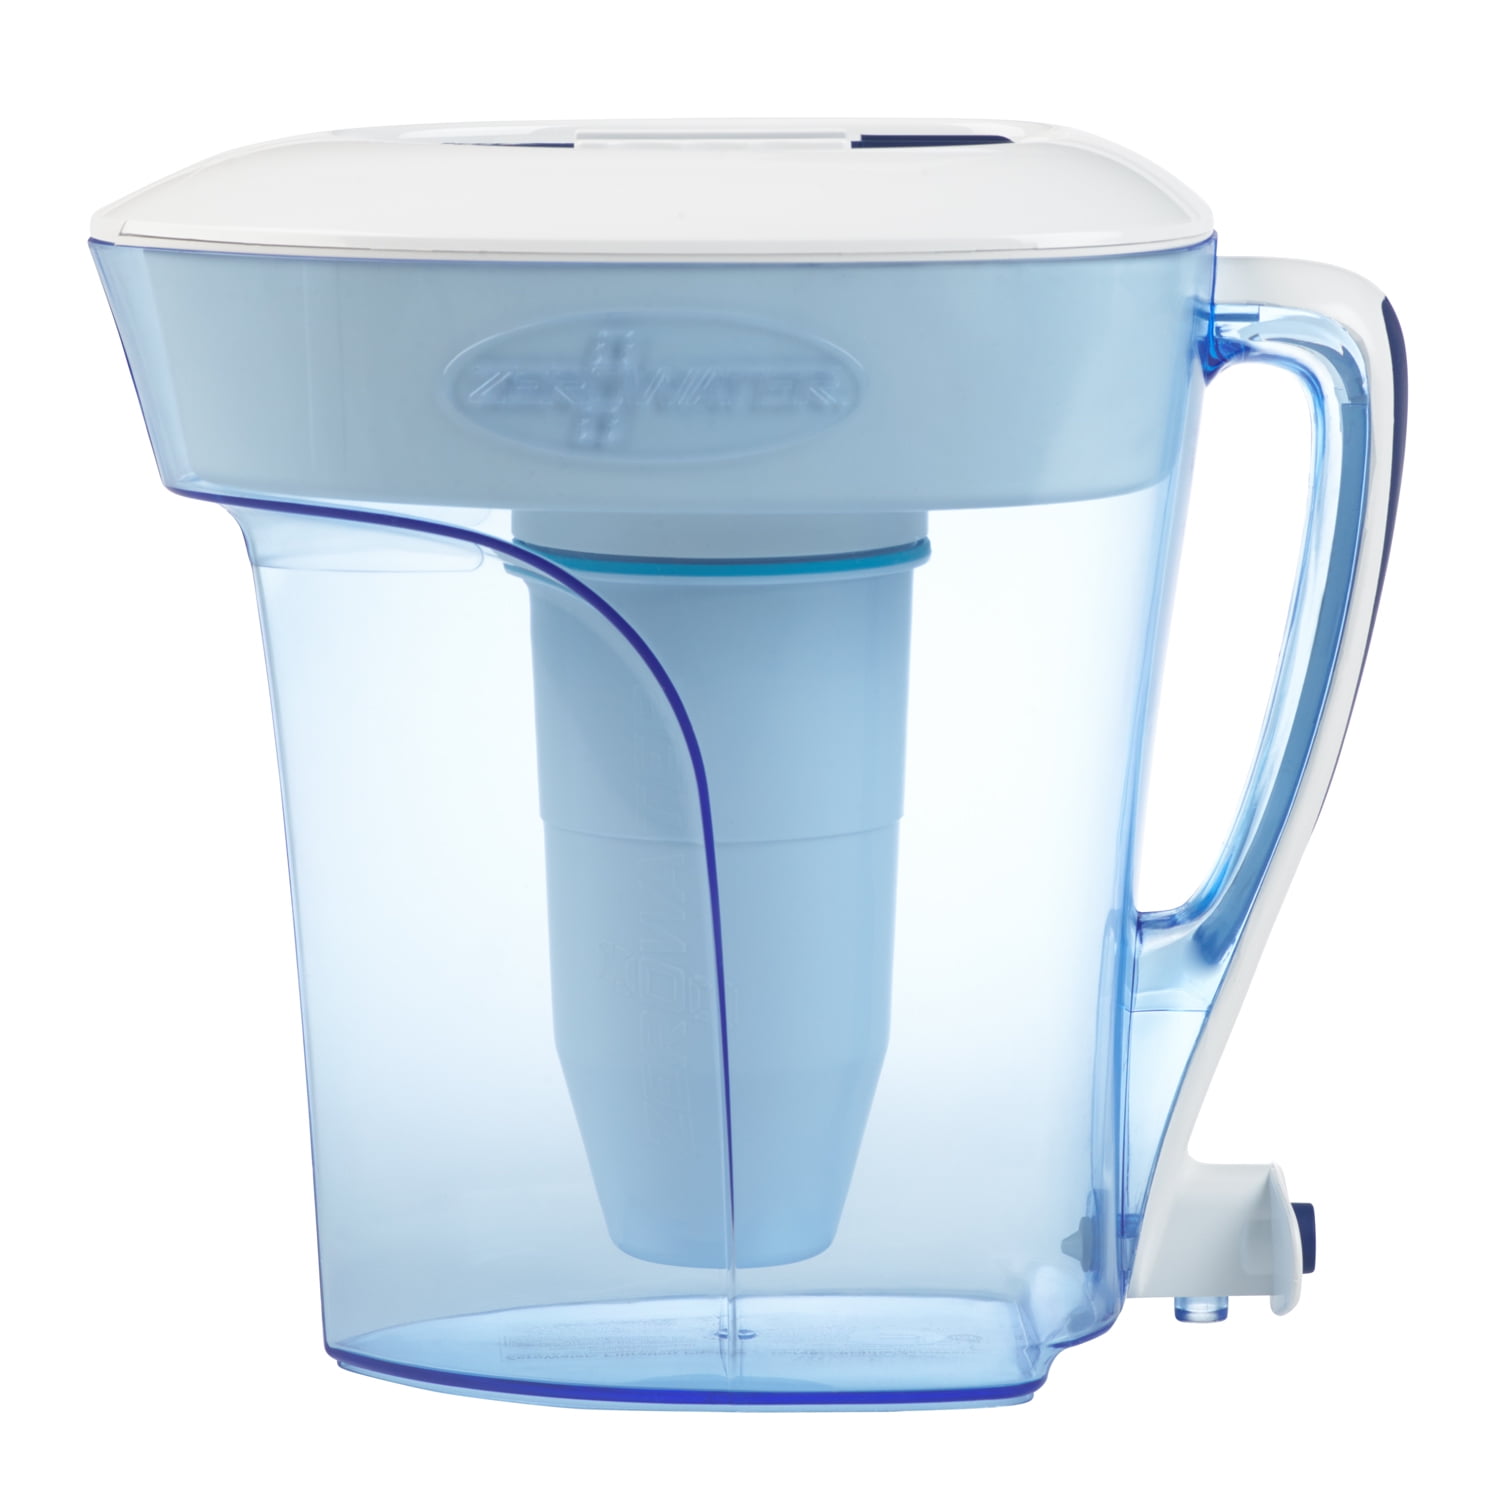 ZeroWater 10 Cup Ready-Pour Filtered Pour-Through Water Pitcher - Blue